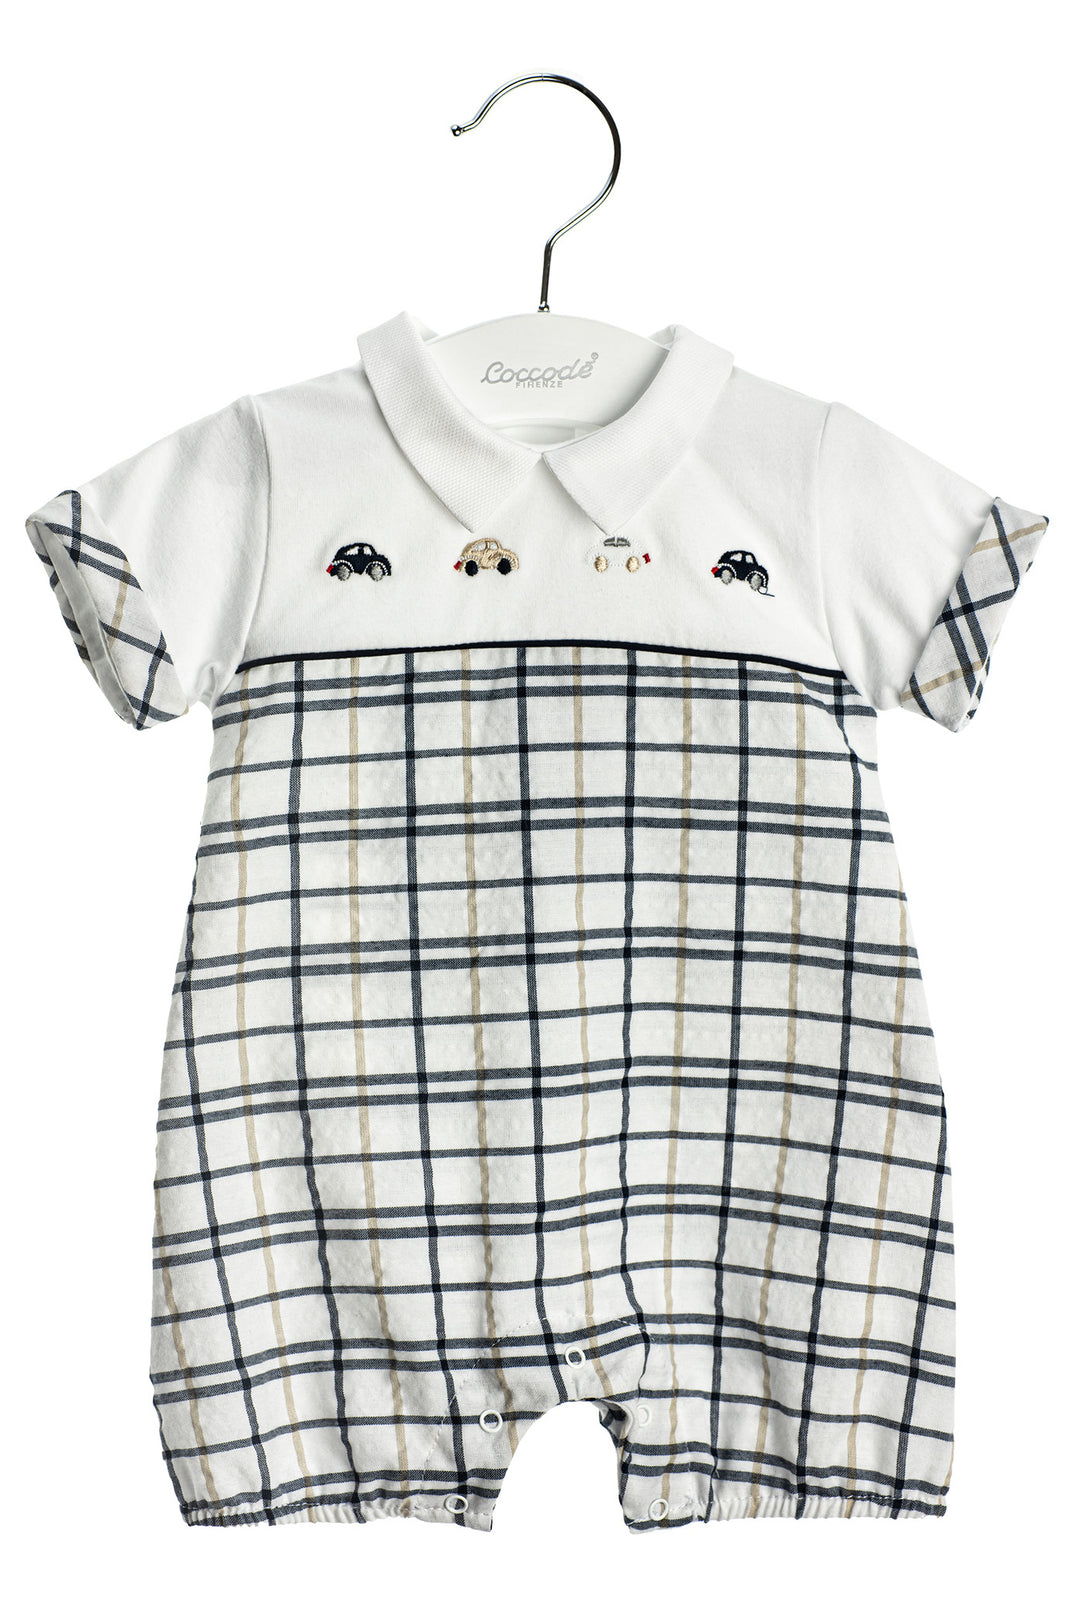 Coccodè "Maurice" Navy Checked Car Romper | iphoneandroidapplications